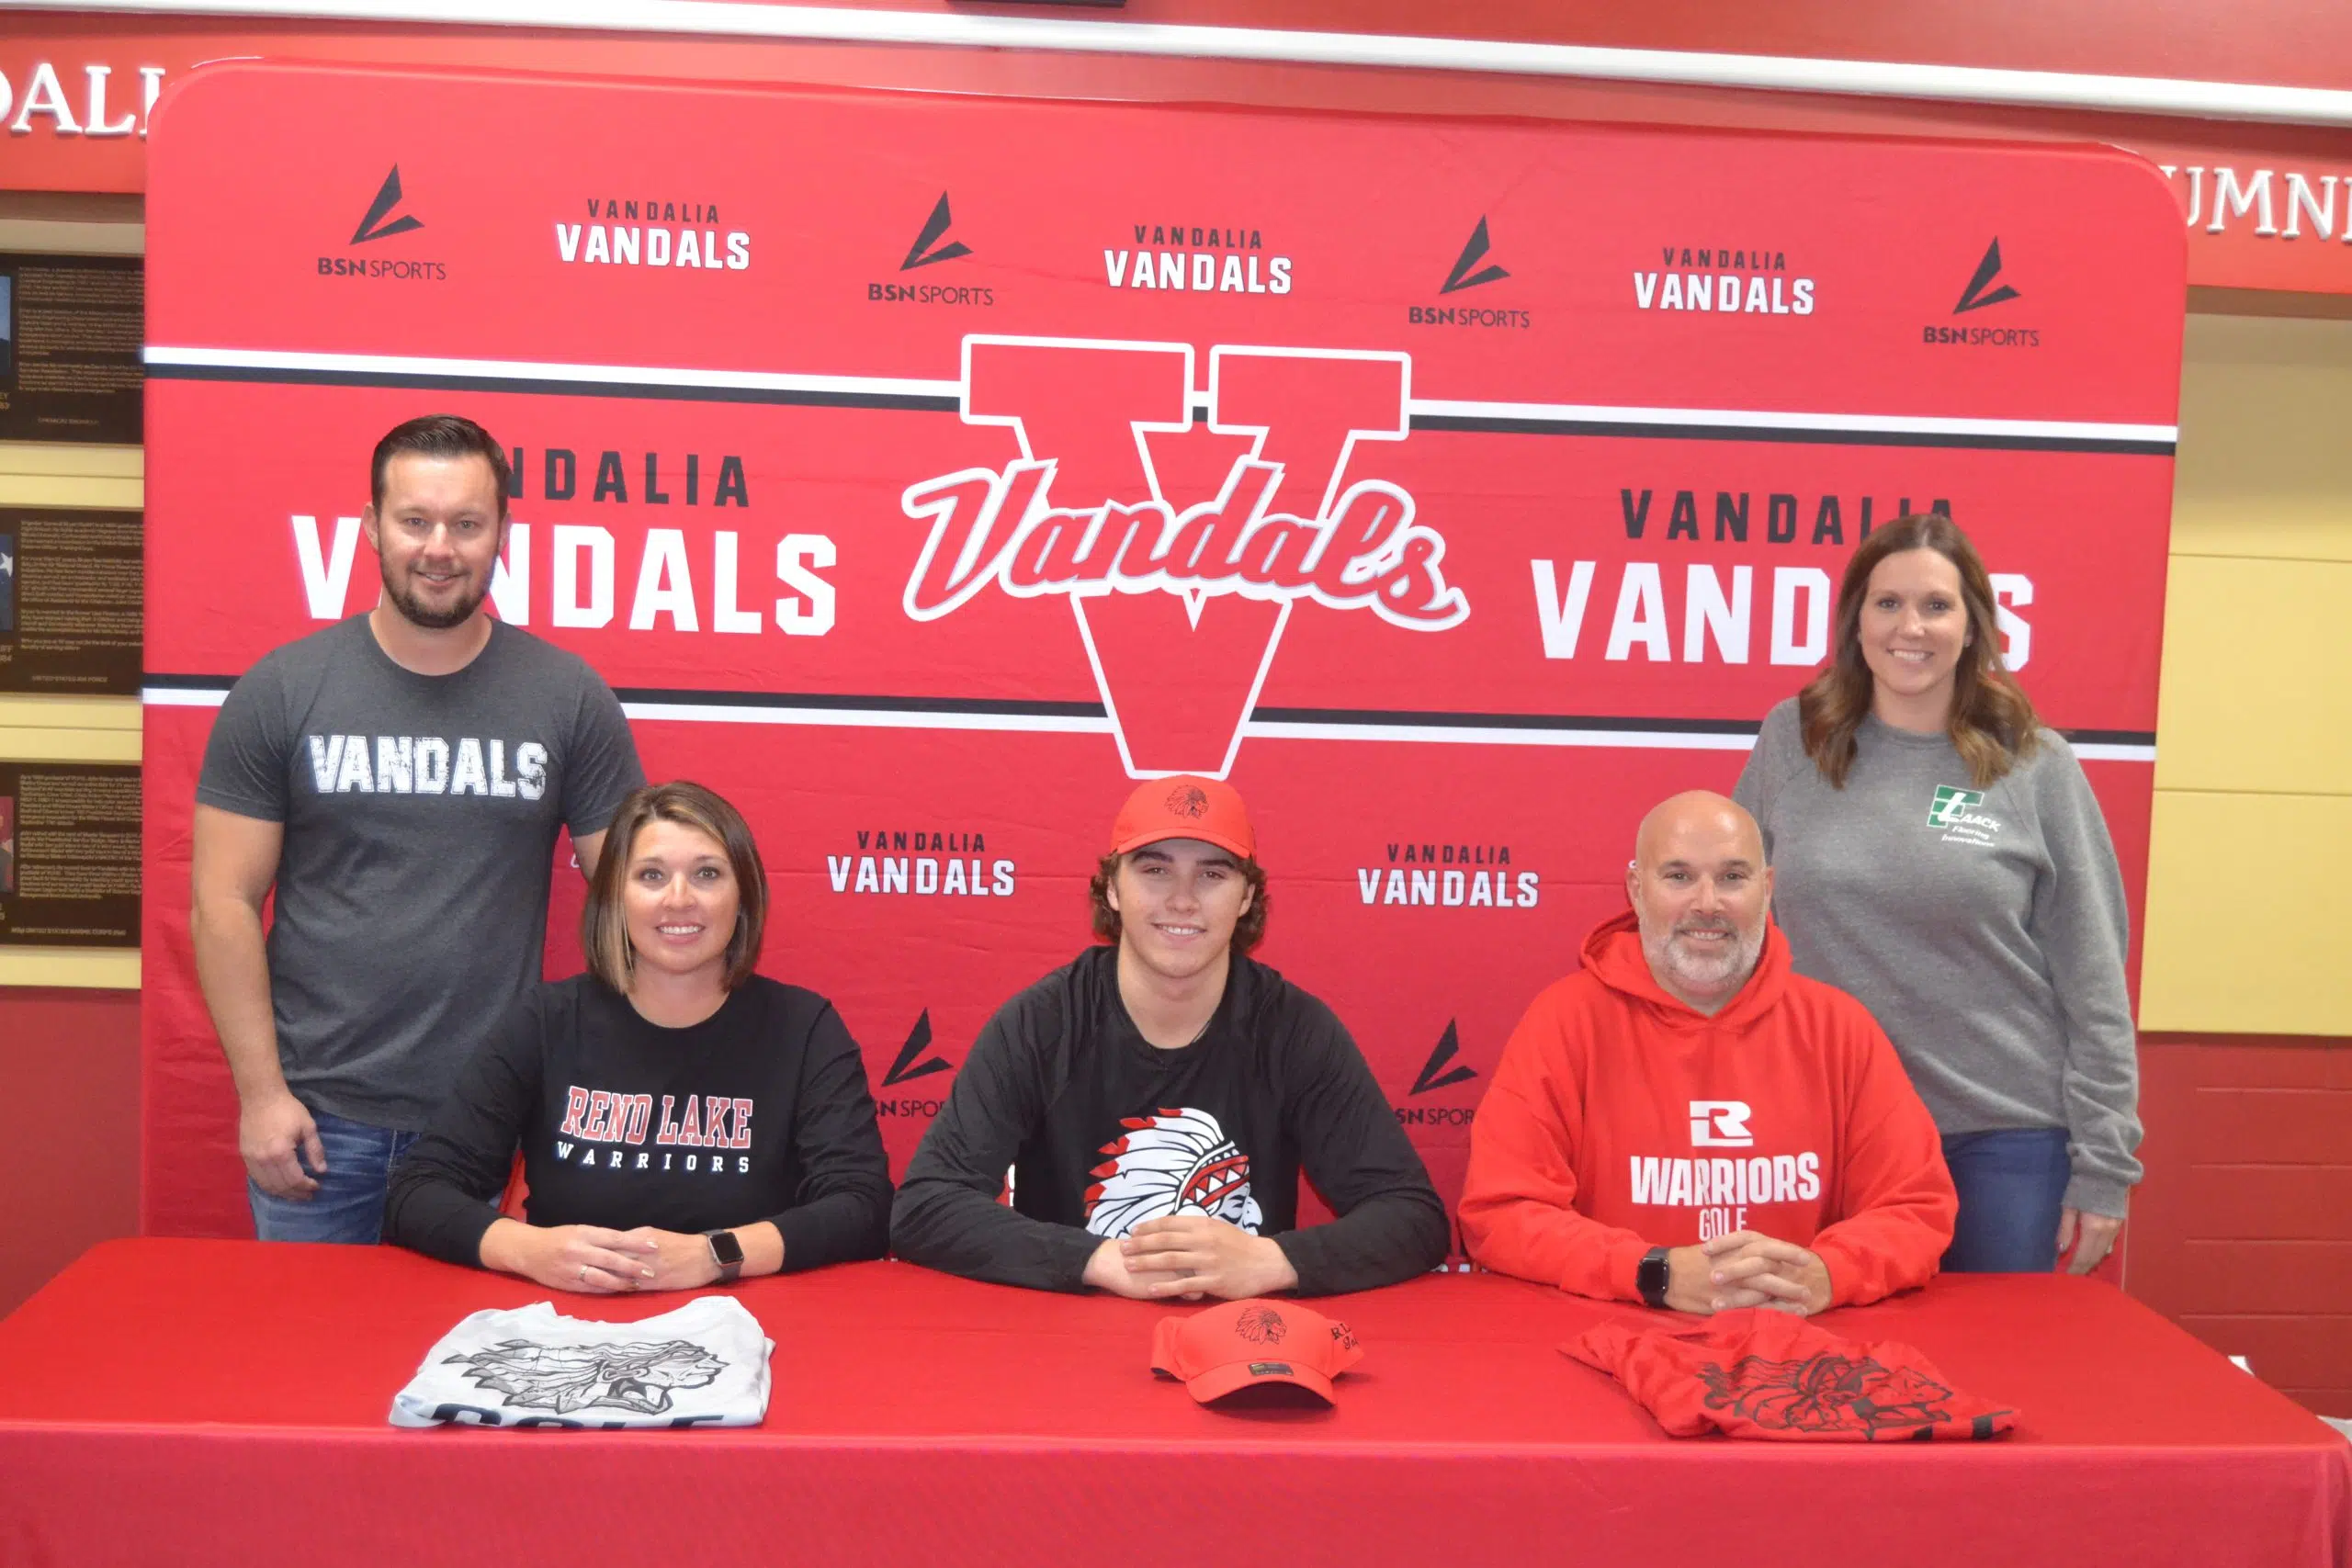 Vandals Senior Chase Laack will attend Rend Lake College to continue his education, play college golf